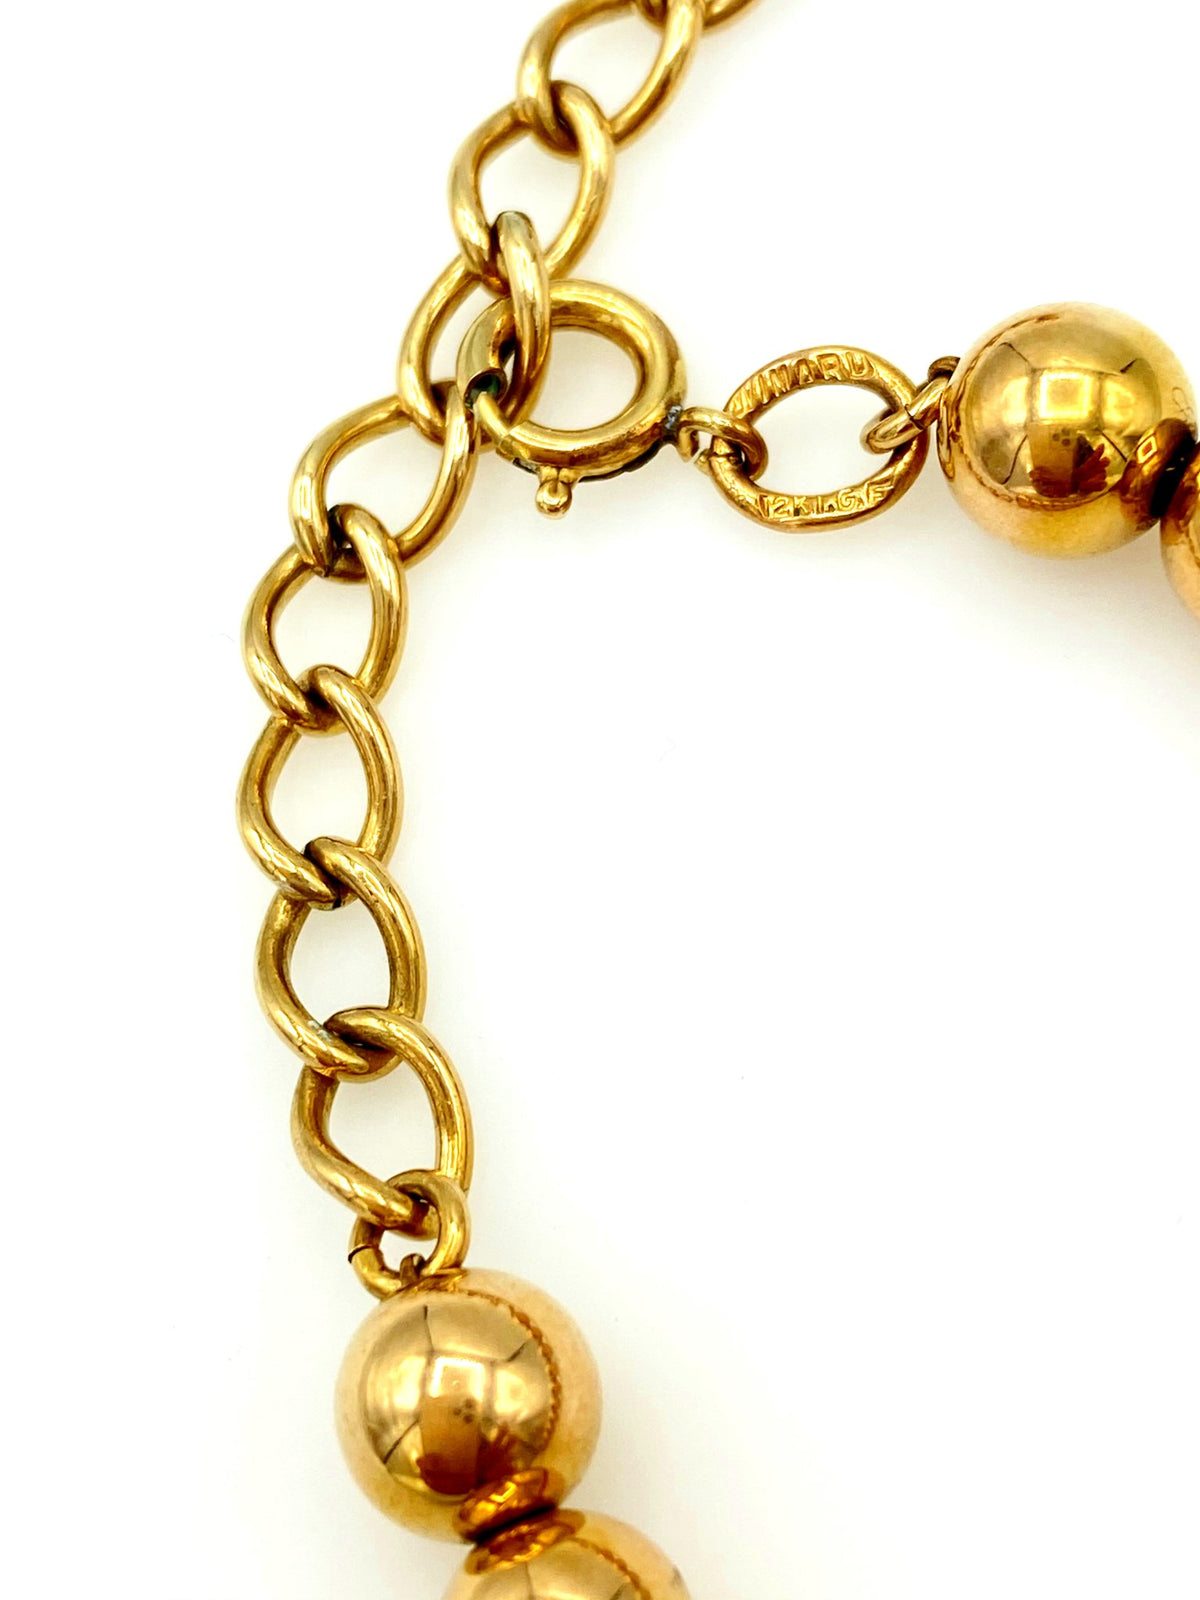 12K Gold Filled Ball Bead Layering Vintage Necklace - 24 Wishes Vintage Jewelry